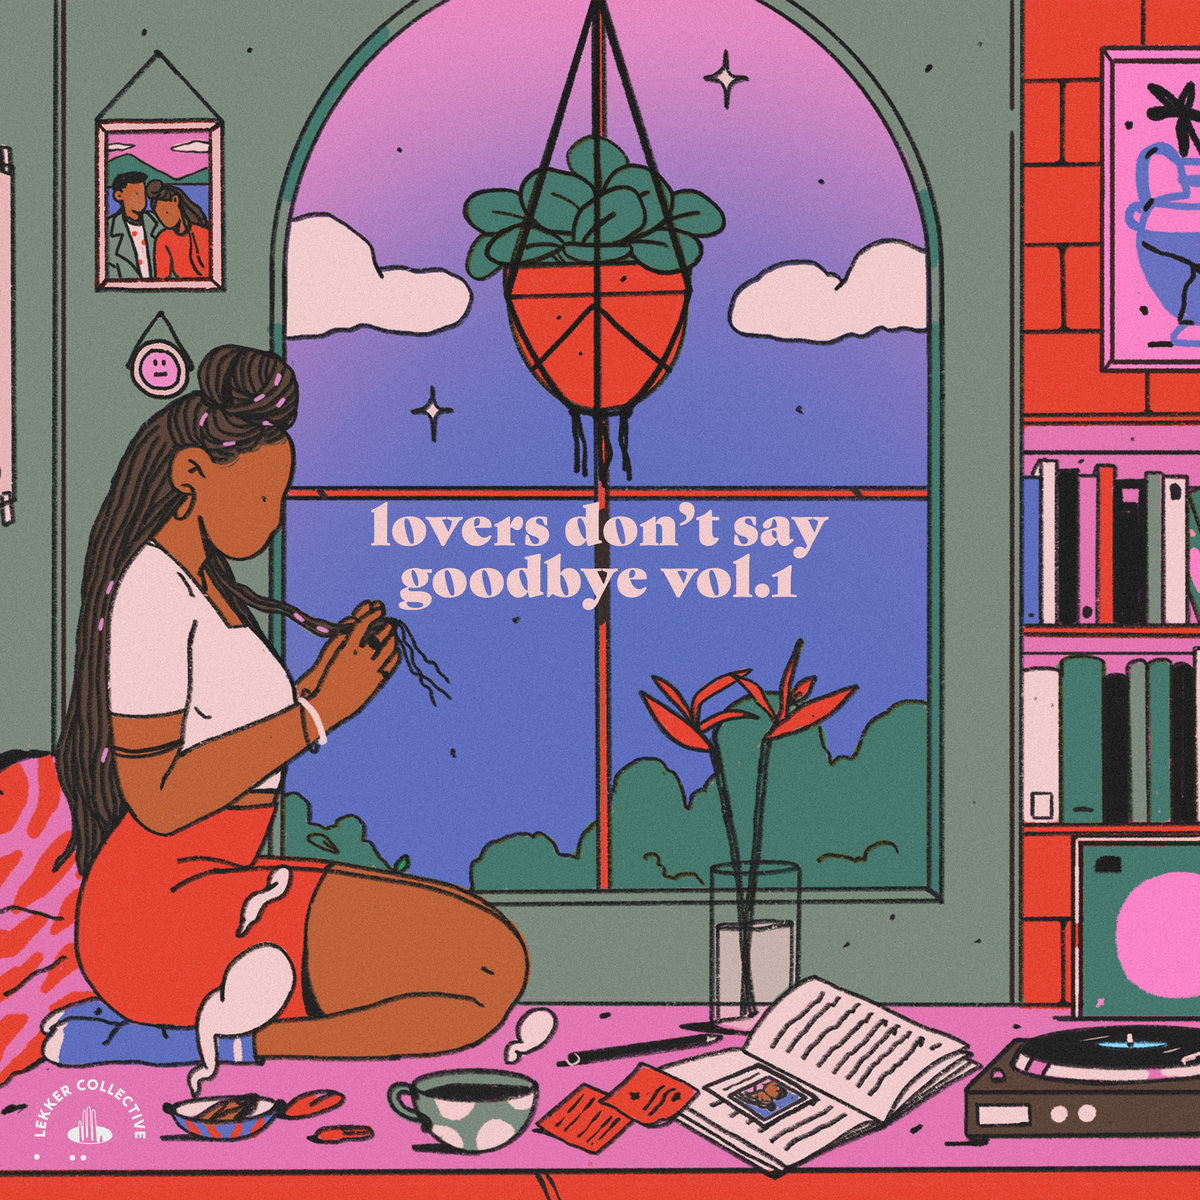 Lekker Collective presents "lovers don't say goodbye (vol. 1)"